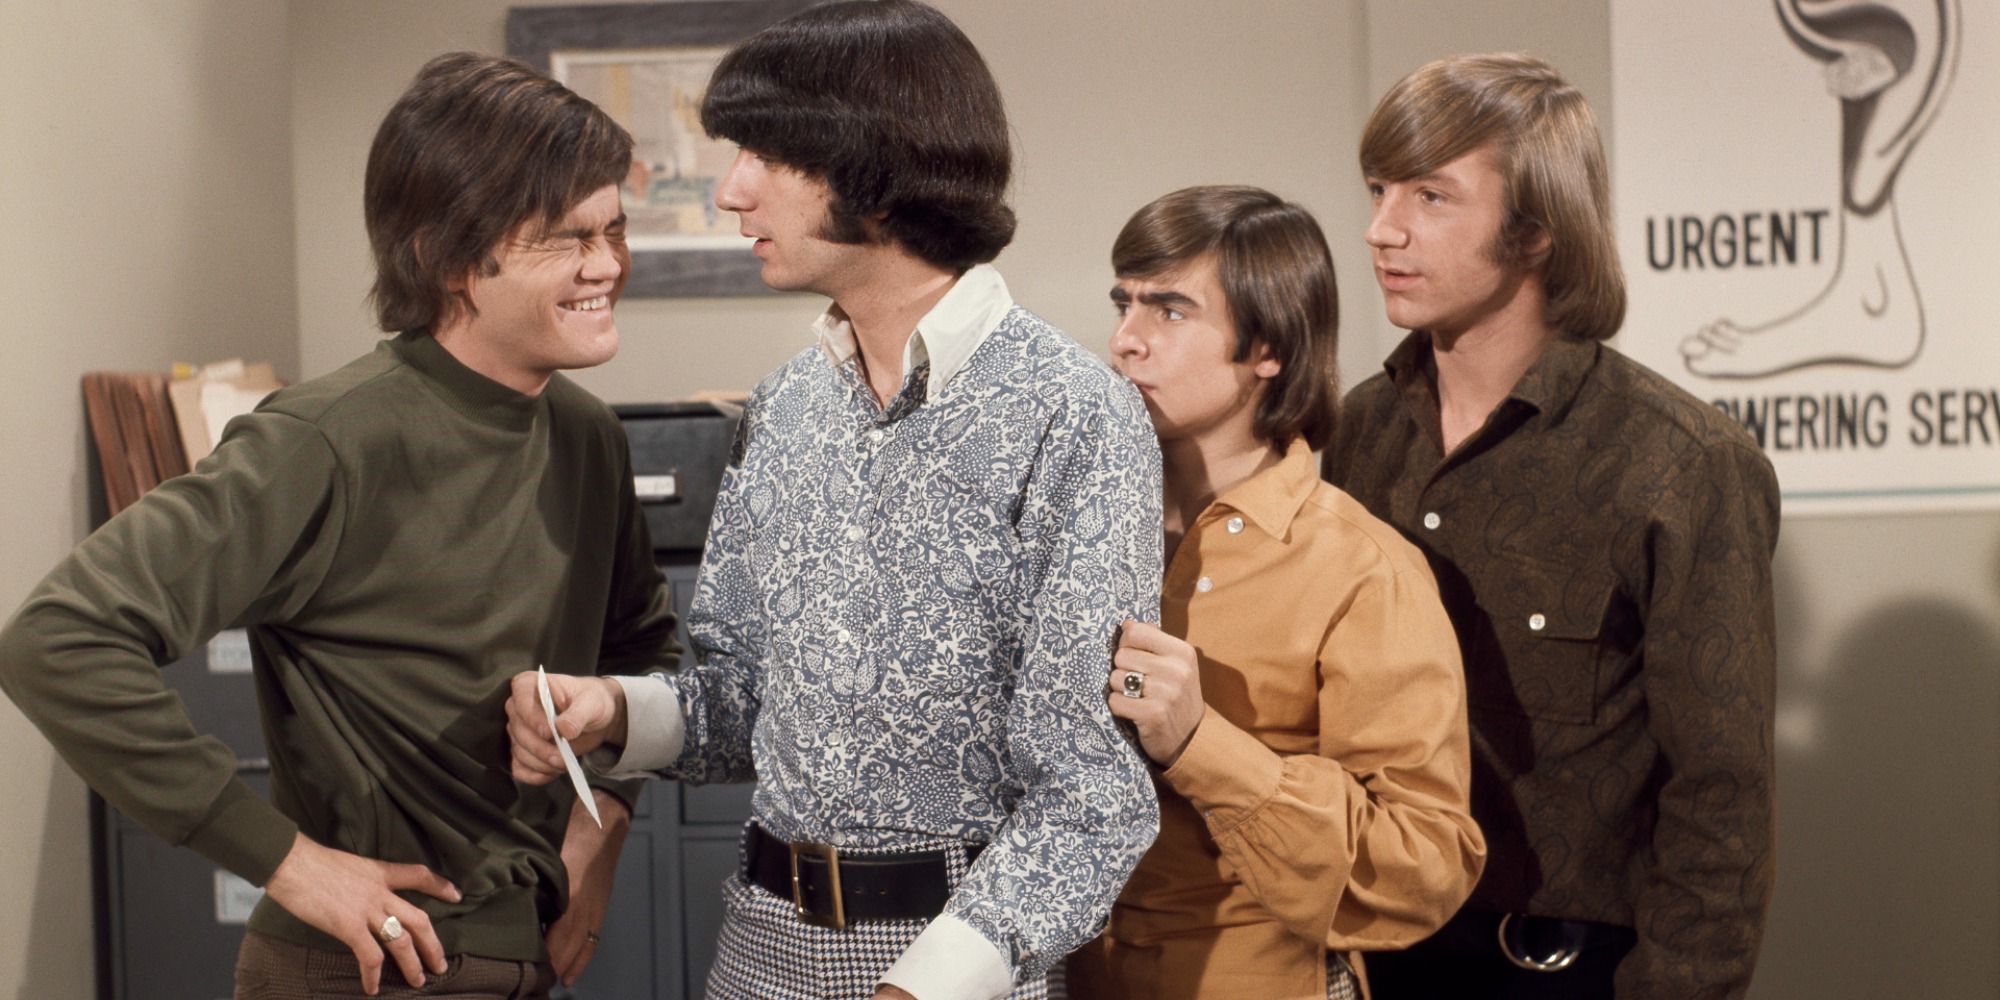 The Monkees pose for a publicity photo on the set of The Monkees television show.